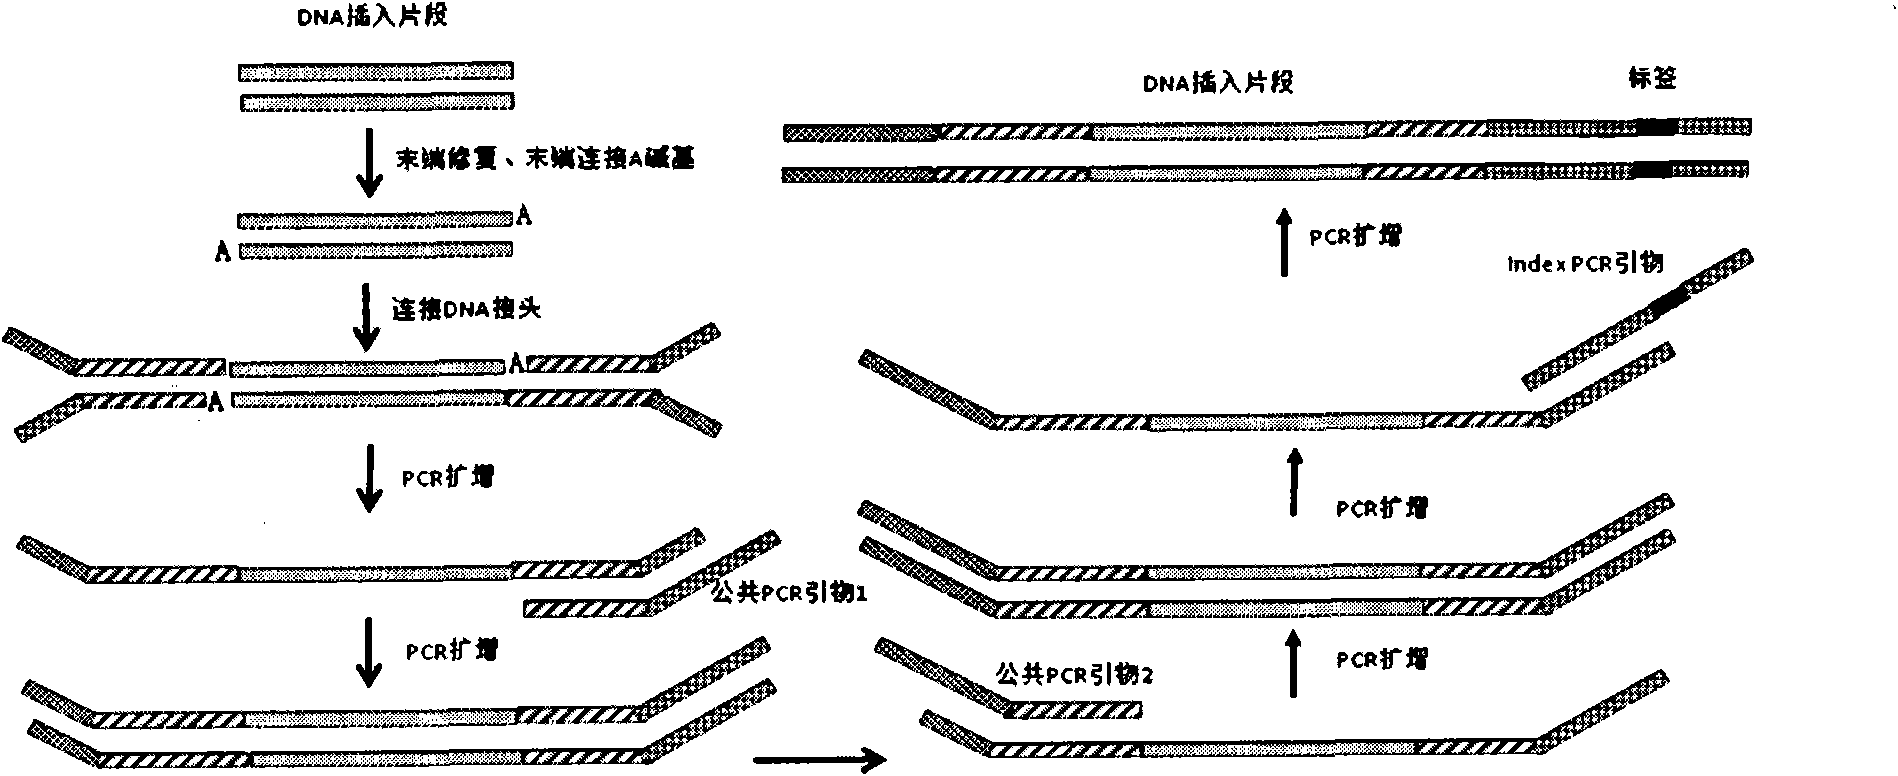 Joint connection-based deoxyribonucleic acid (DNA) polymerase chain reaction (PCR)-free tag library construction method